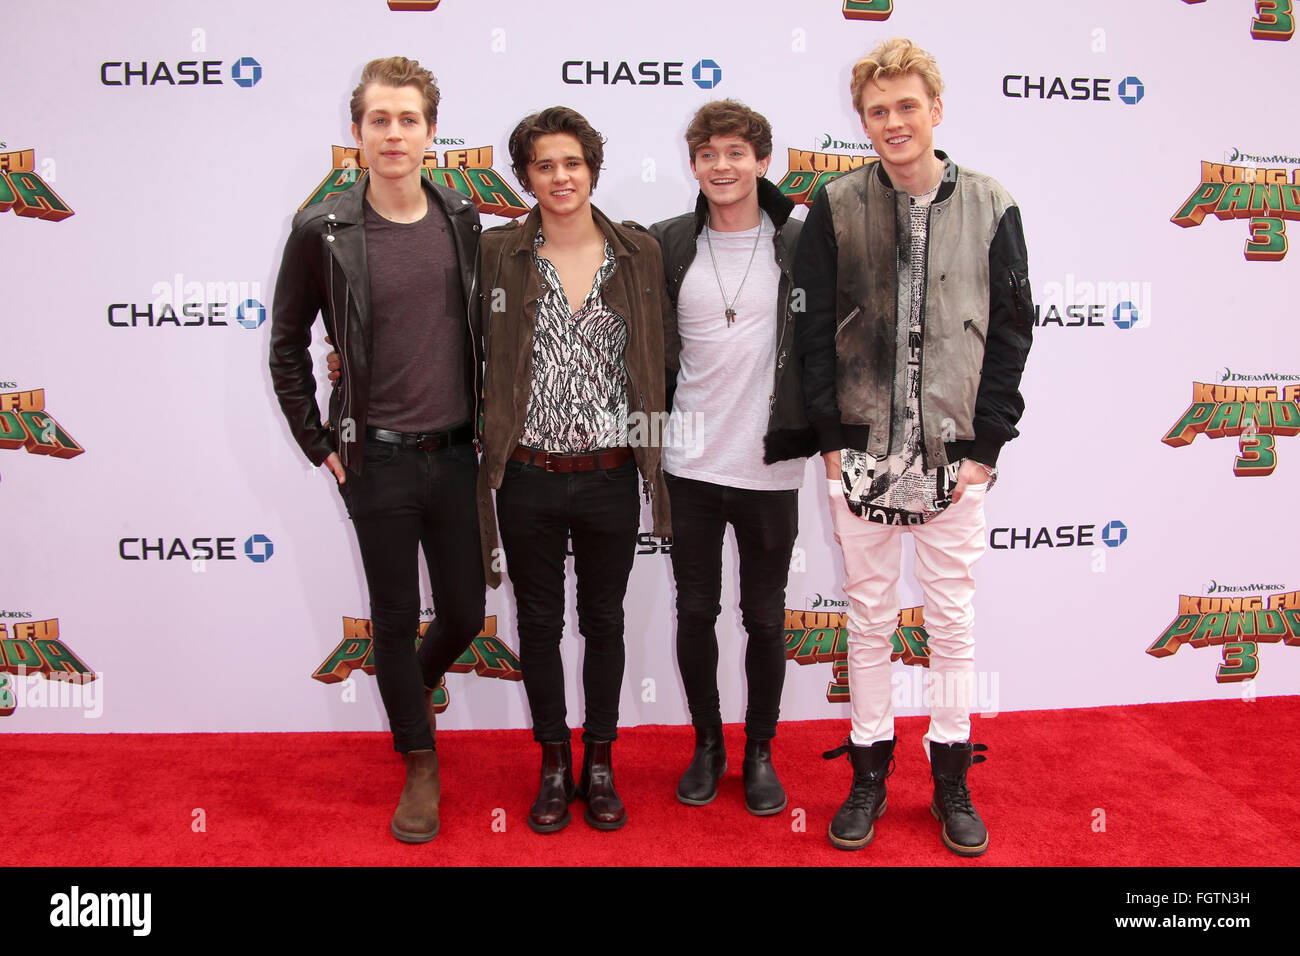 World premiere of 'Kung Fu Panda 3' - Arrivals  Featuring: Connor Ball, Tristan Evans, James McVey, Brad Simpson Where: Los Angeles, California, United States When: 16 Jan 2016 Stock Photo